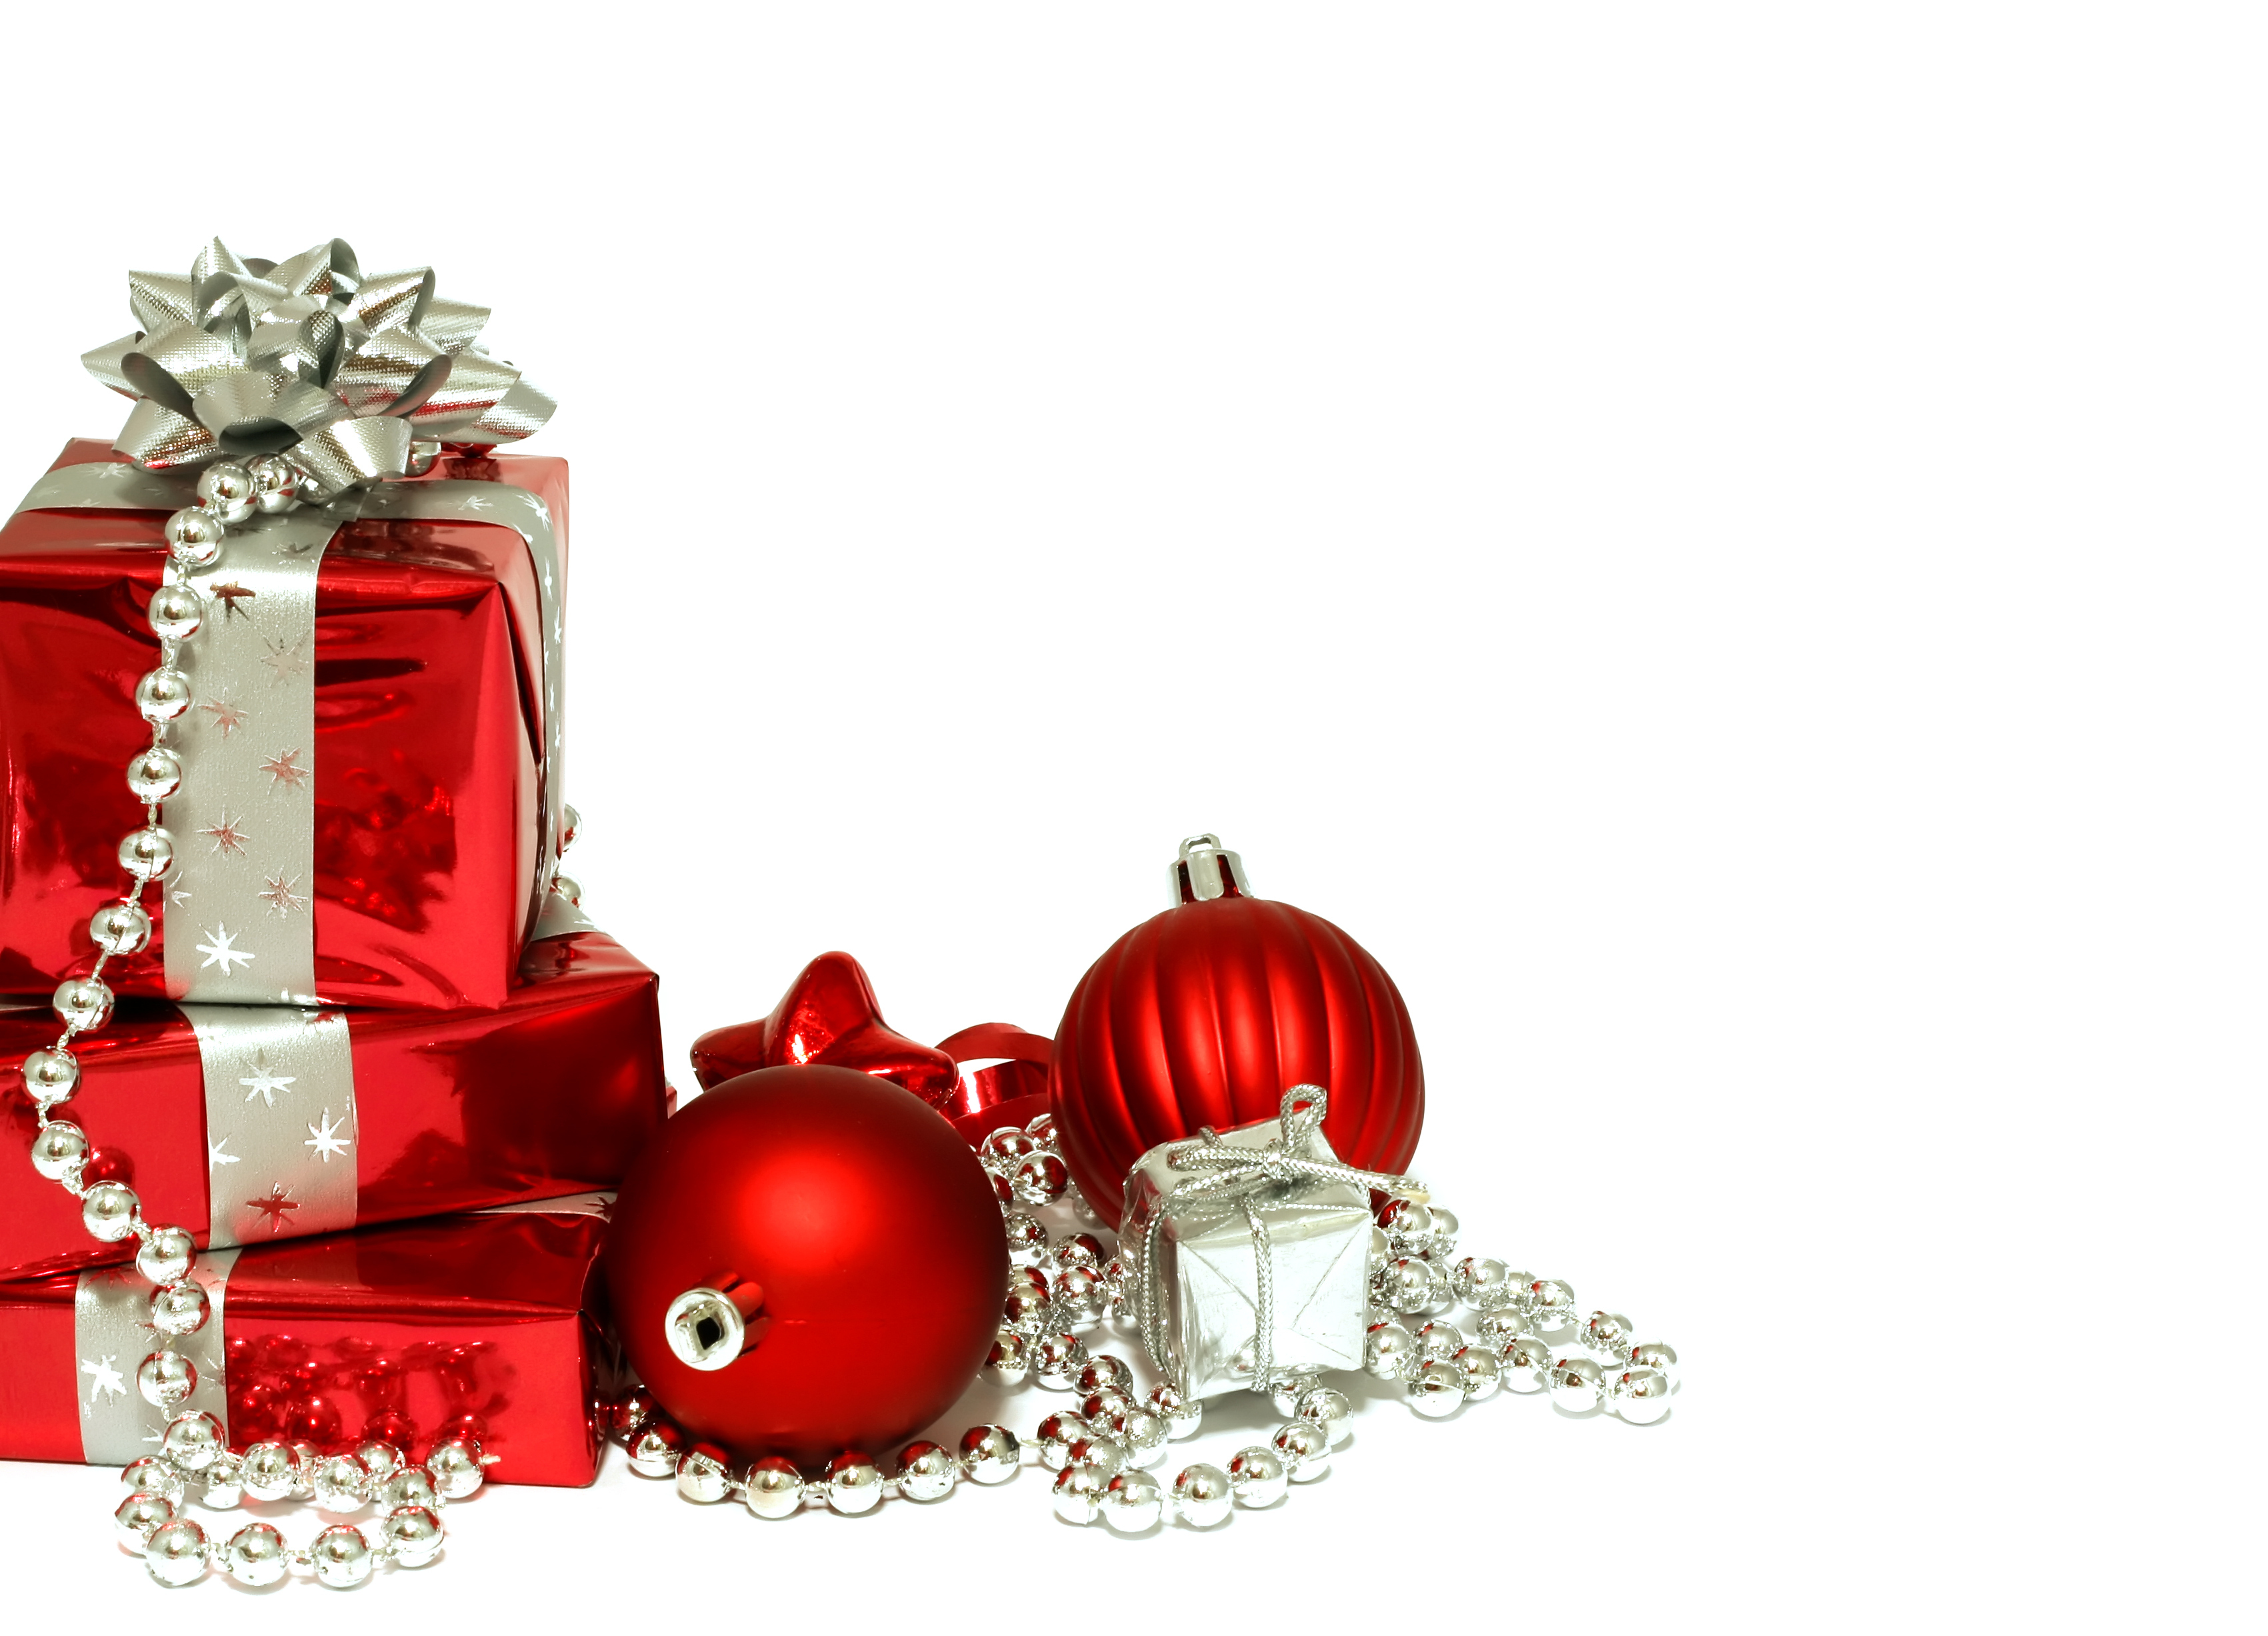 Red Christmas decorations and gifts on Christmas white